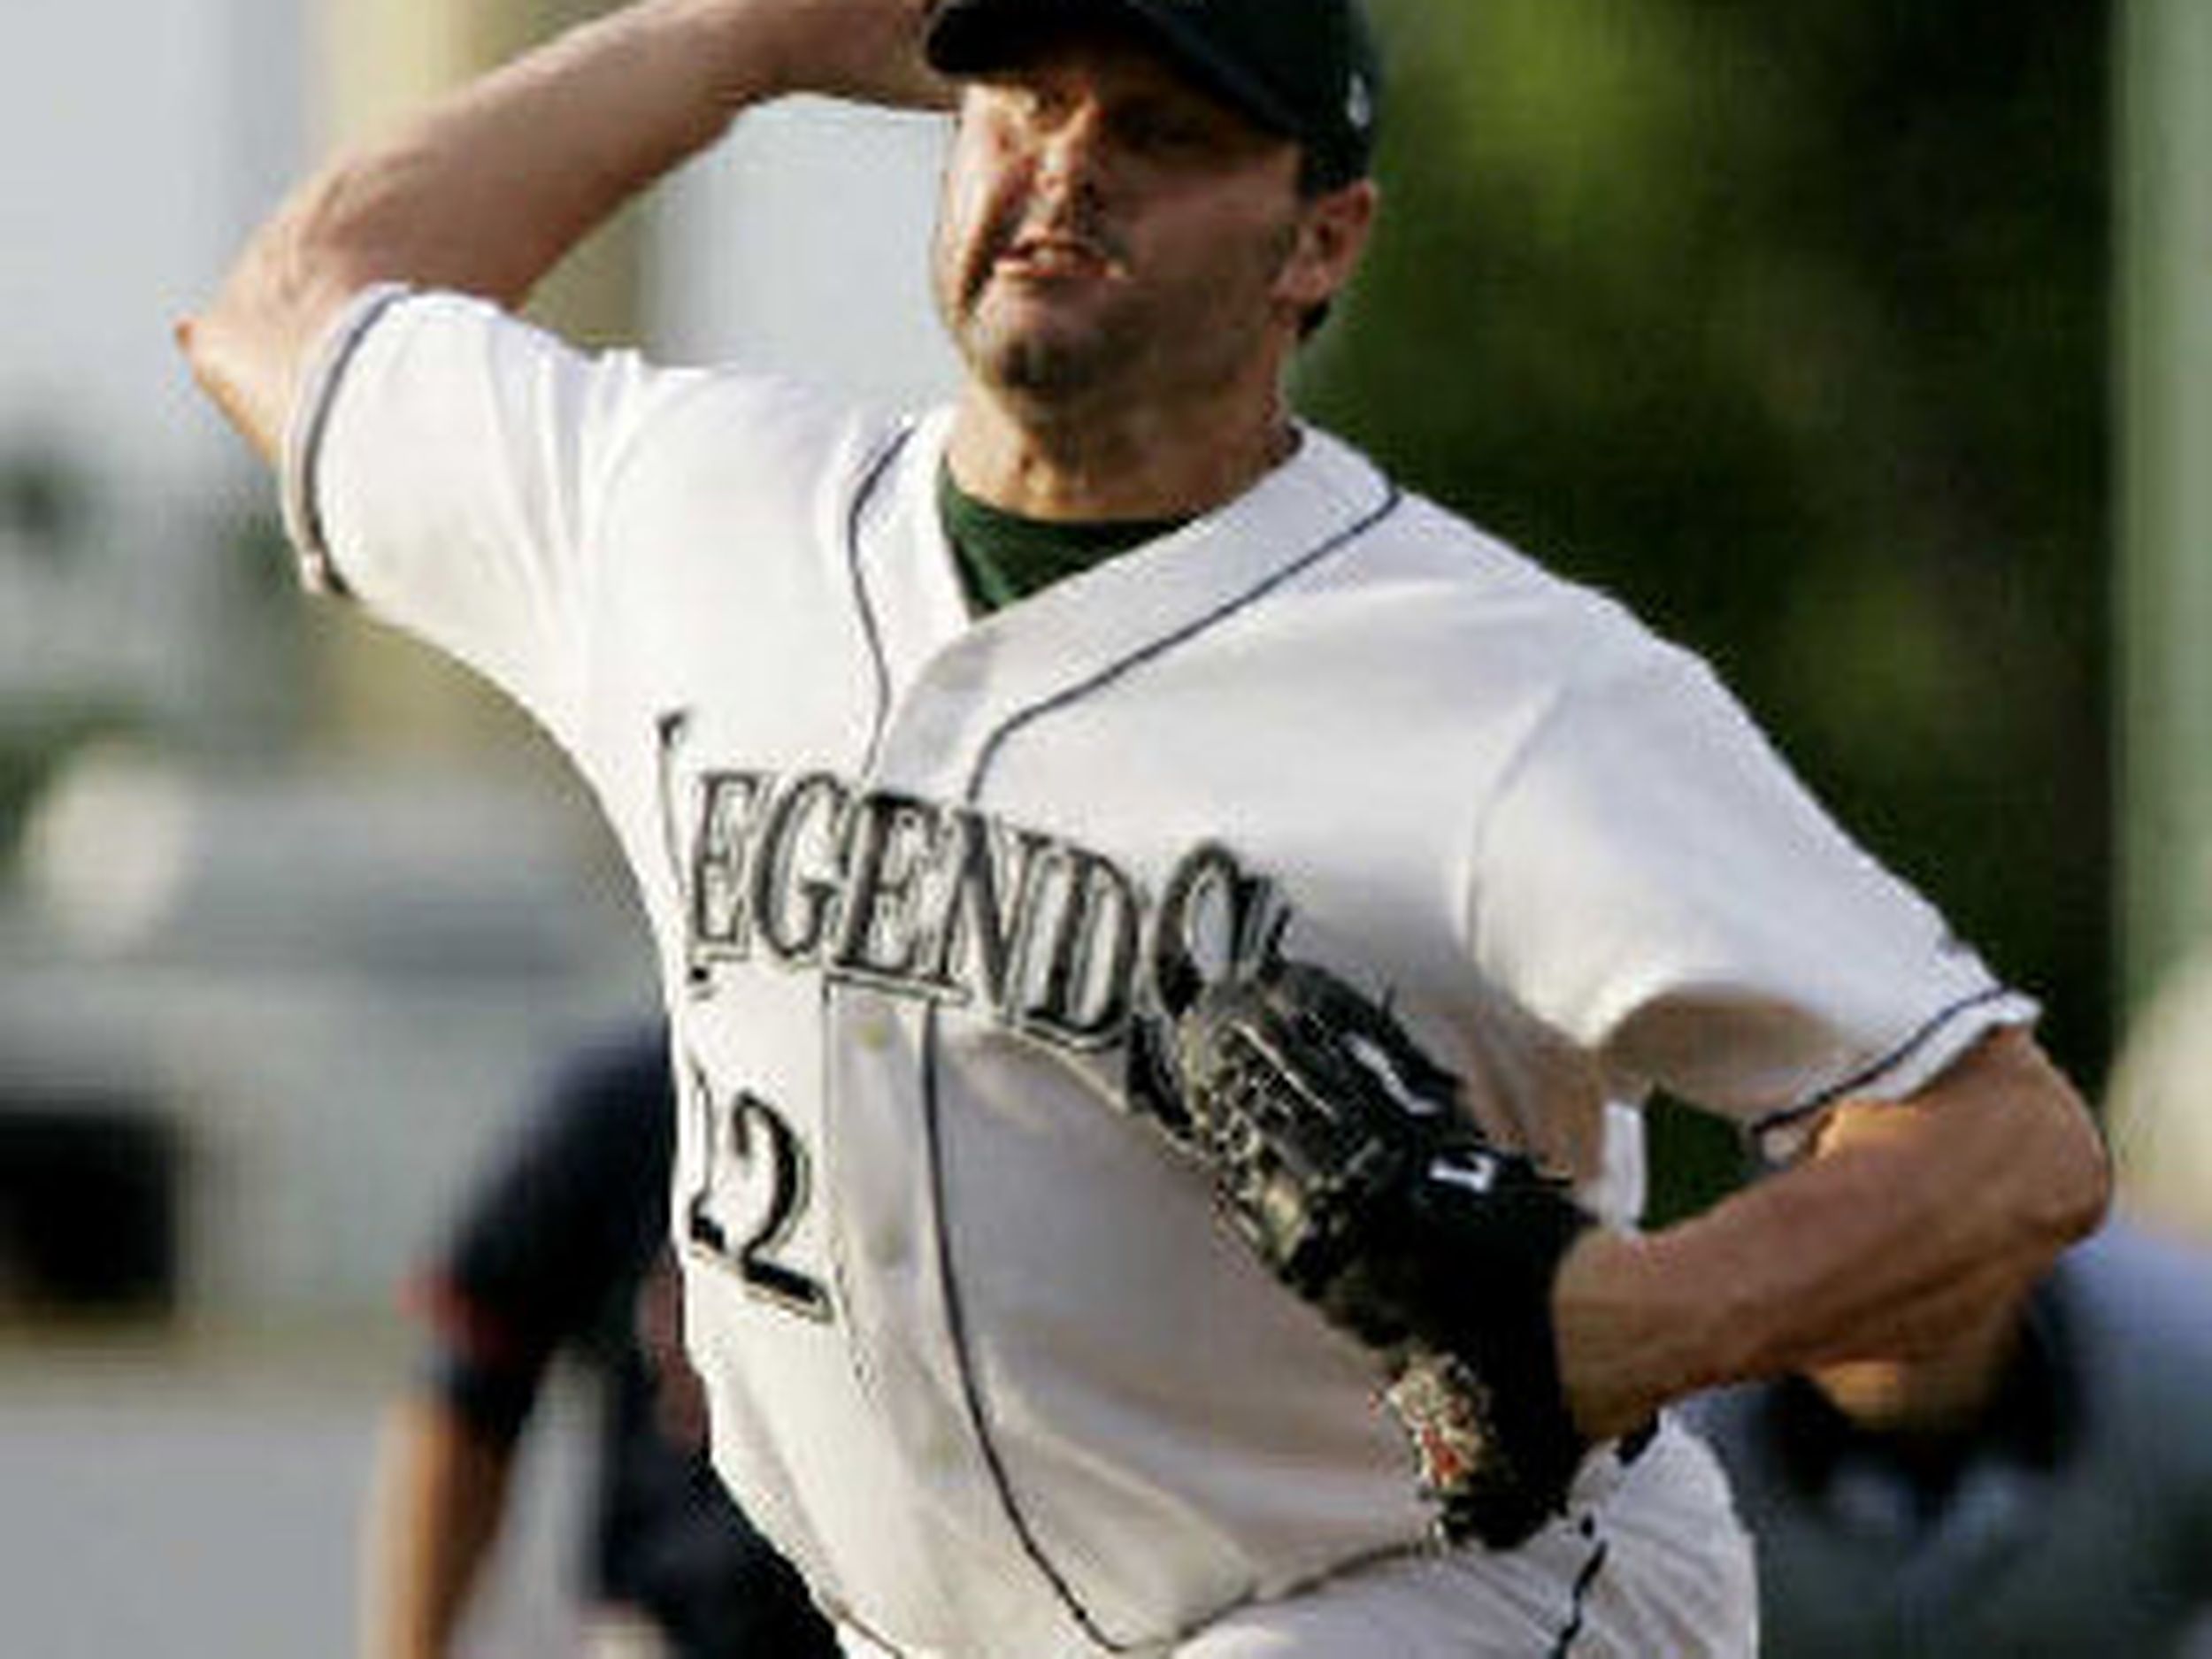 Roger Clemens (MLB Pitching Legend) - On This Day